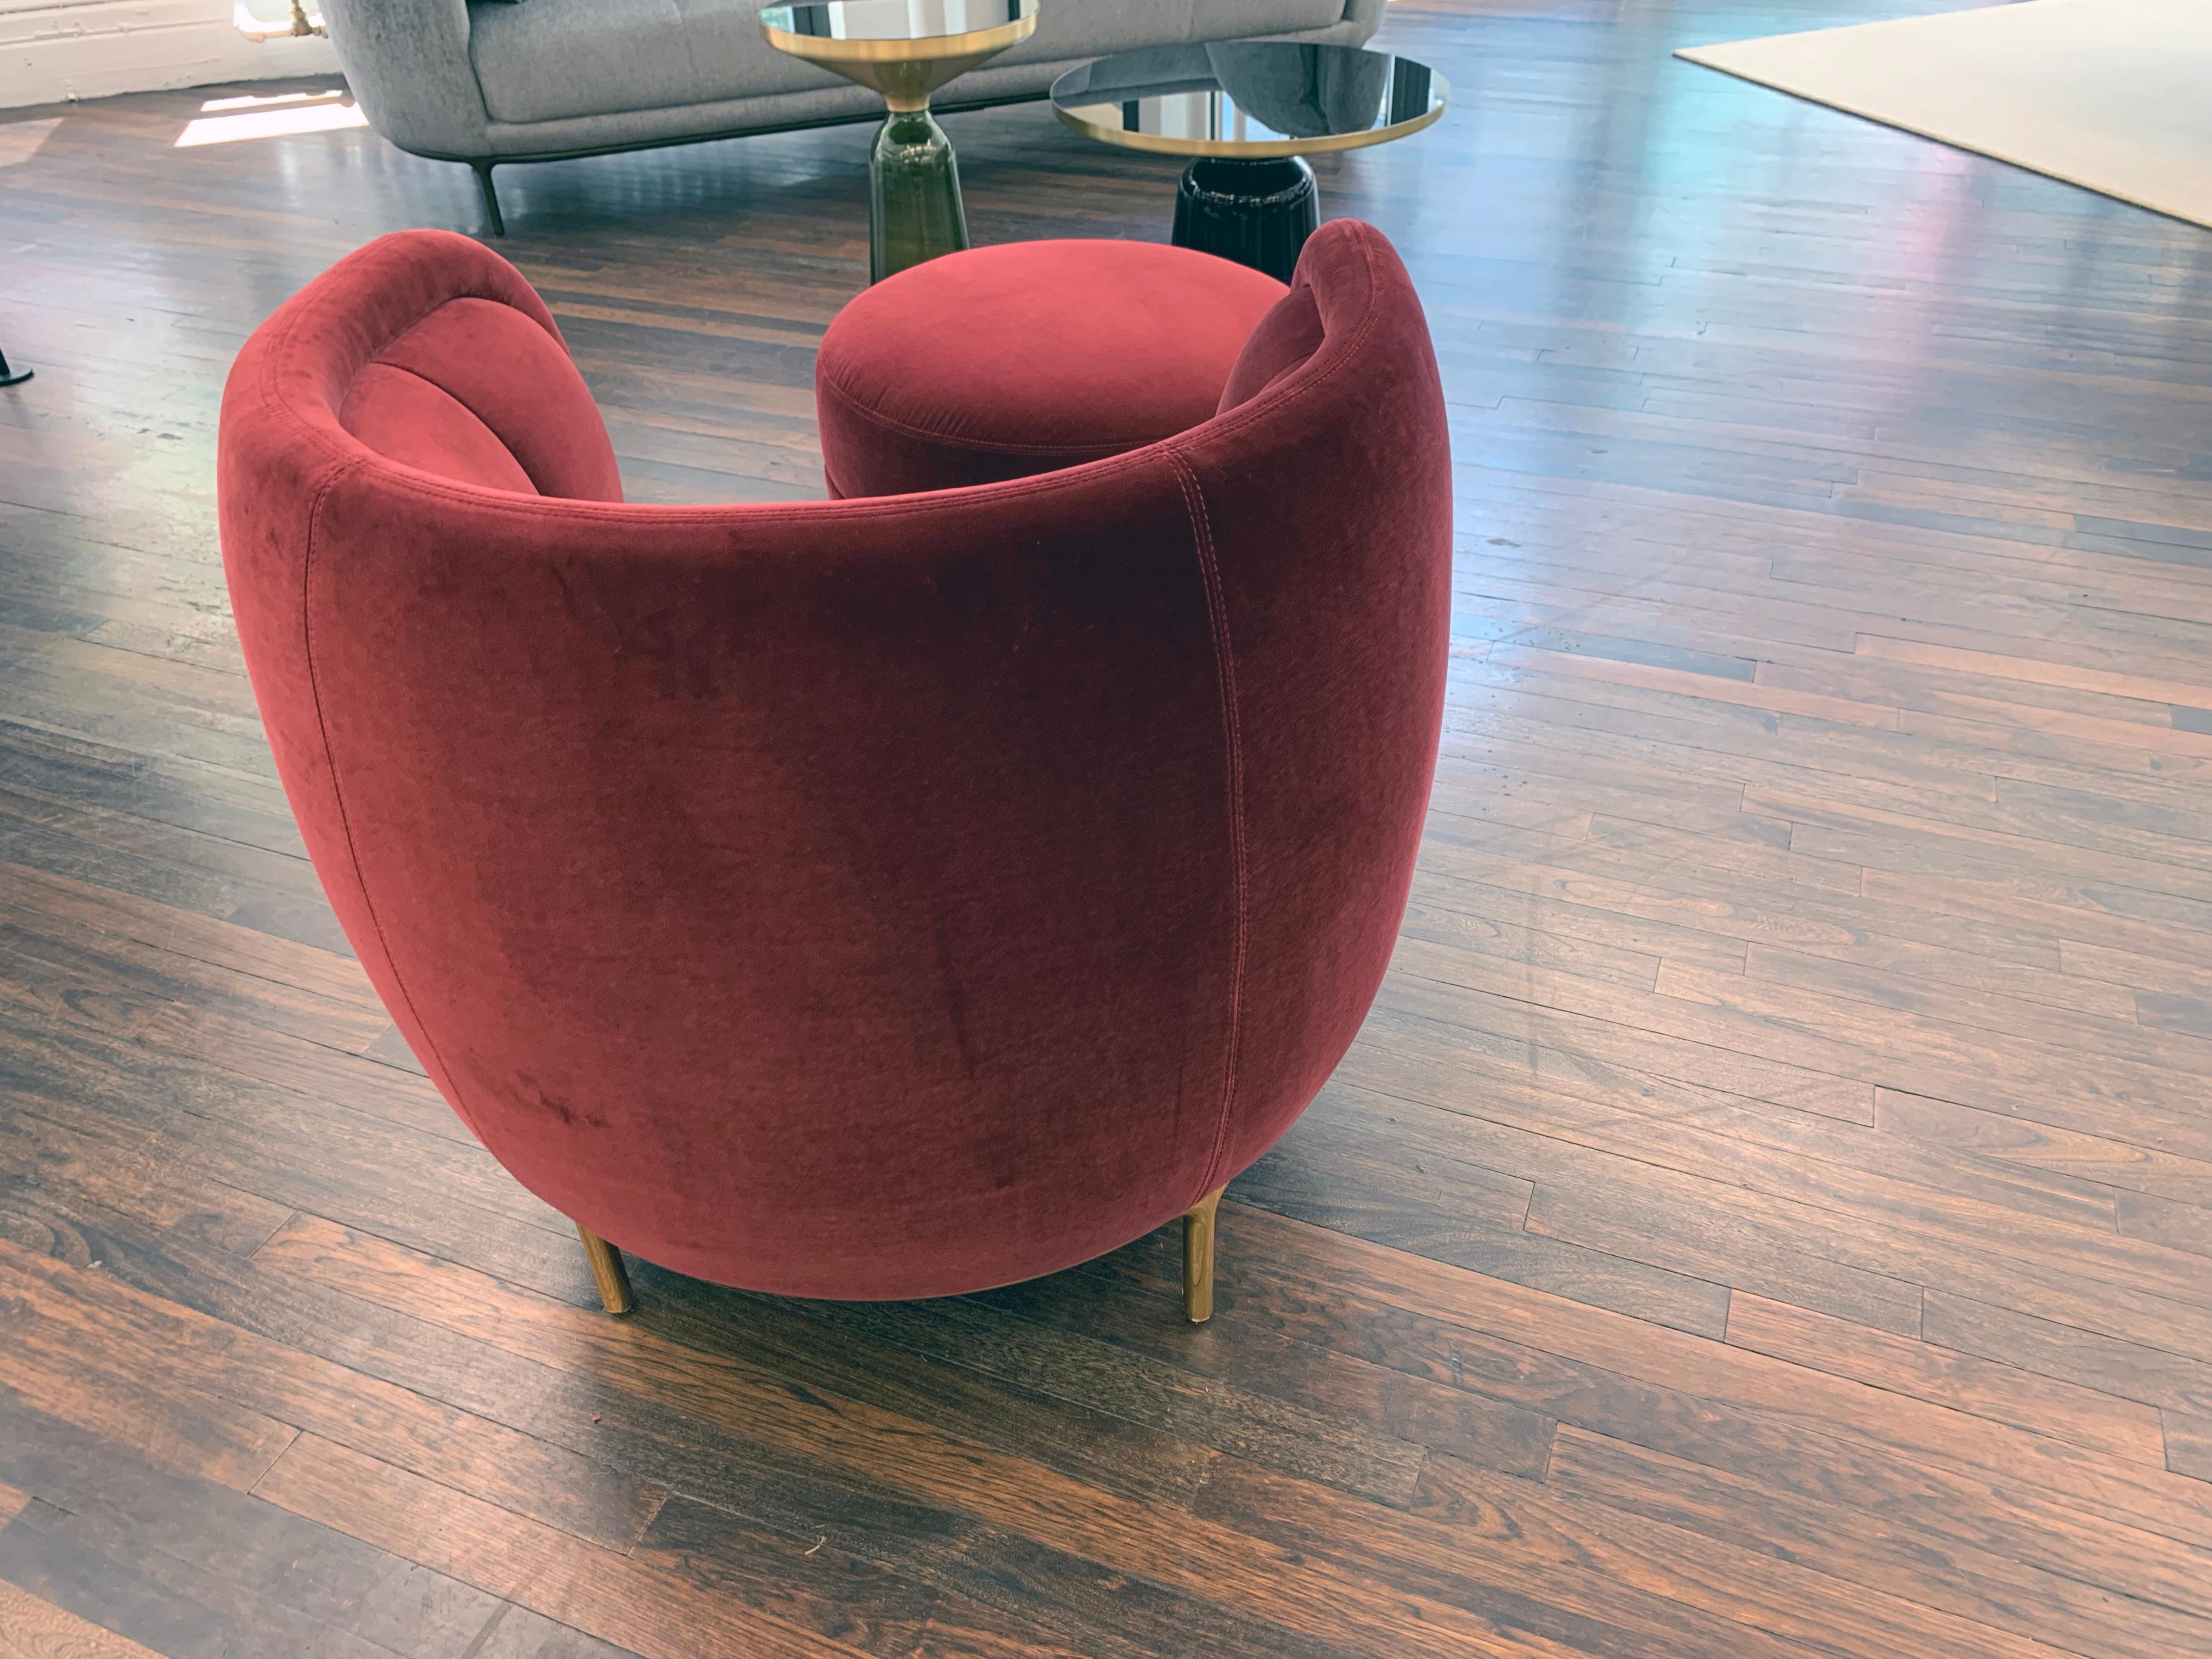 It radiates through its unusual proportions, a special charm as a solitary character. The large lounge chair (Measures: width 80, depth 82, height 75cm) with its articulating seam patterns are reminiscent of Viennese.
Wittmann Vuelta 80, 24-karat